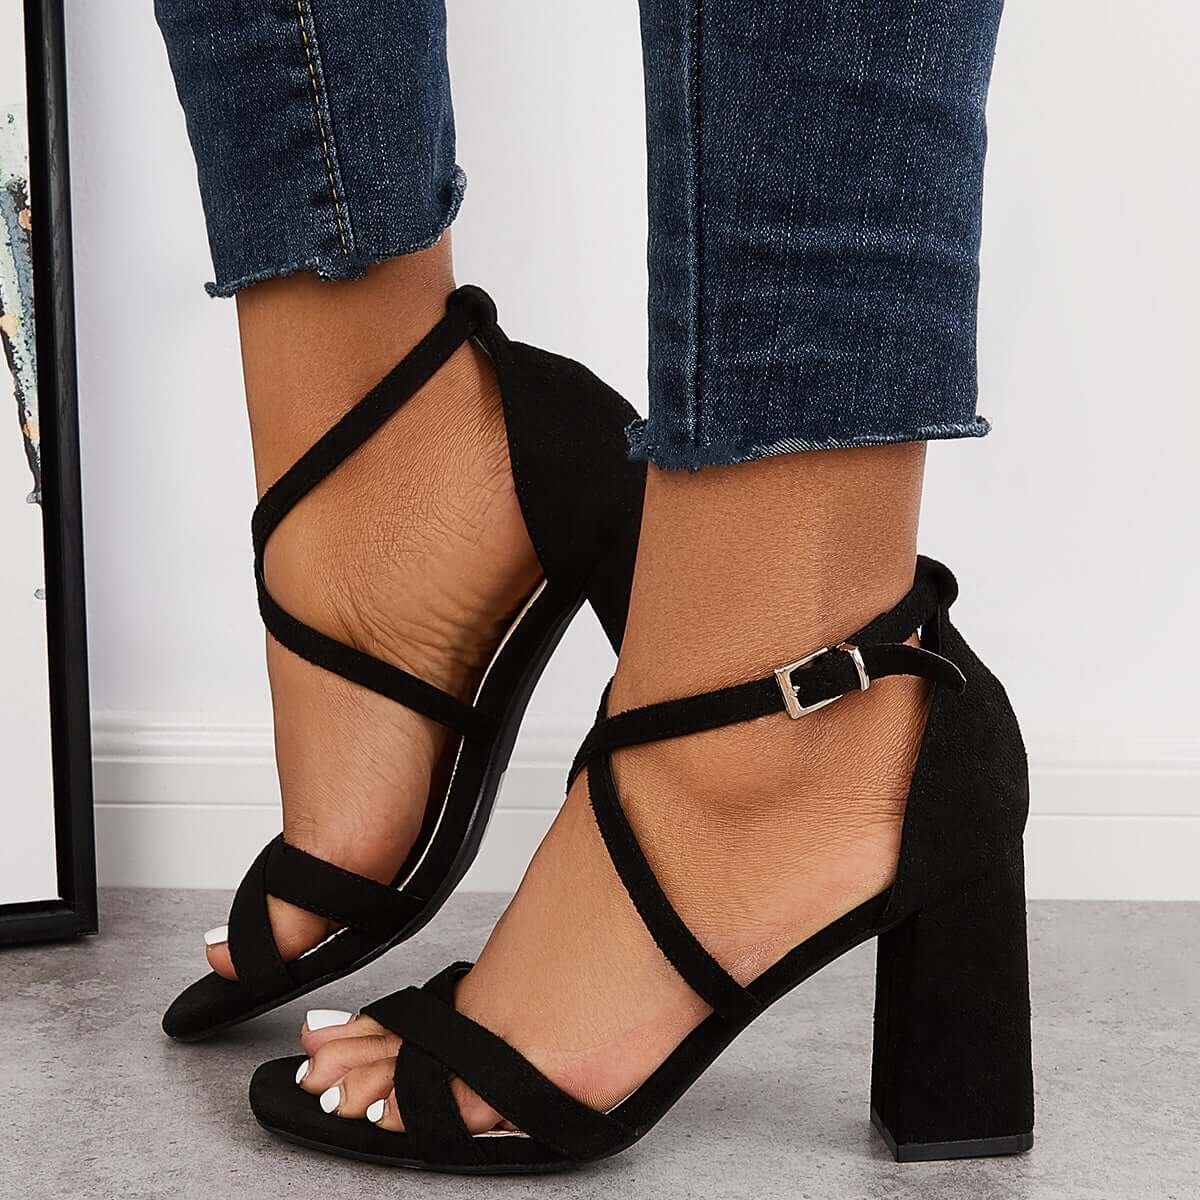 Criss Cross Strappy Chunky Block Heels Ankle Strap Sandals